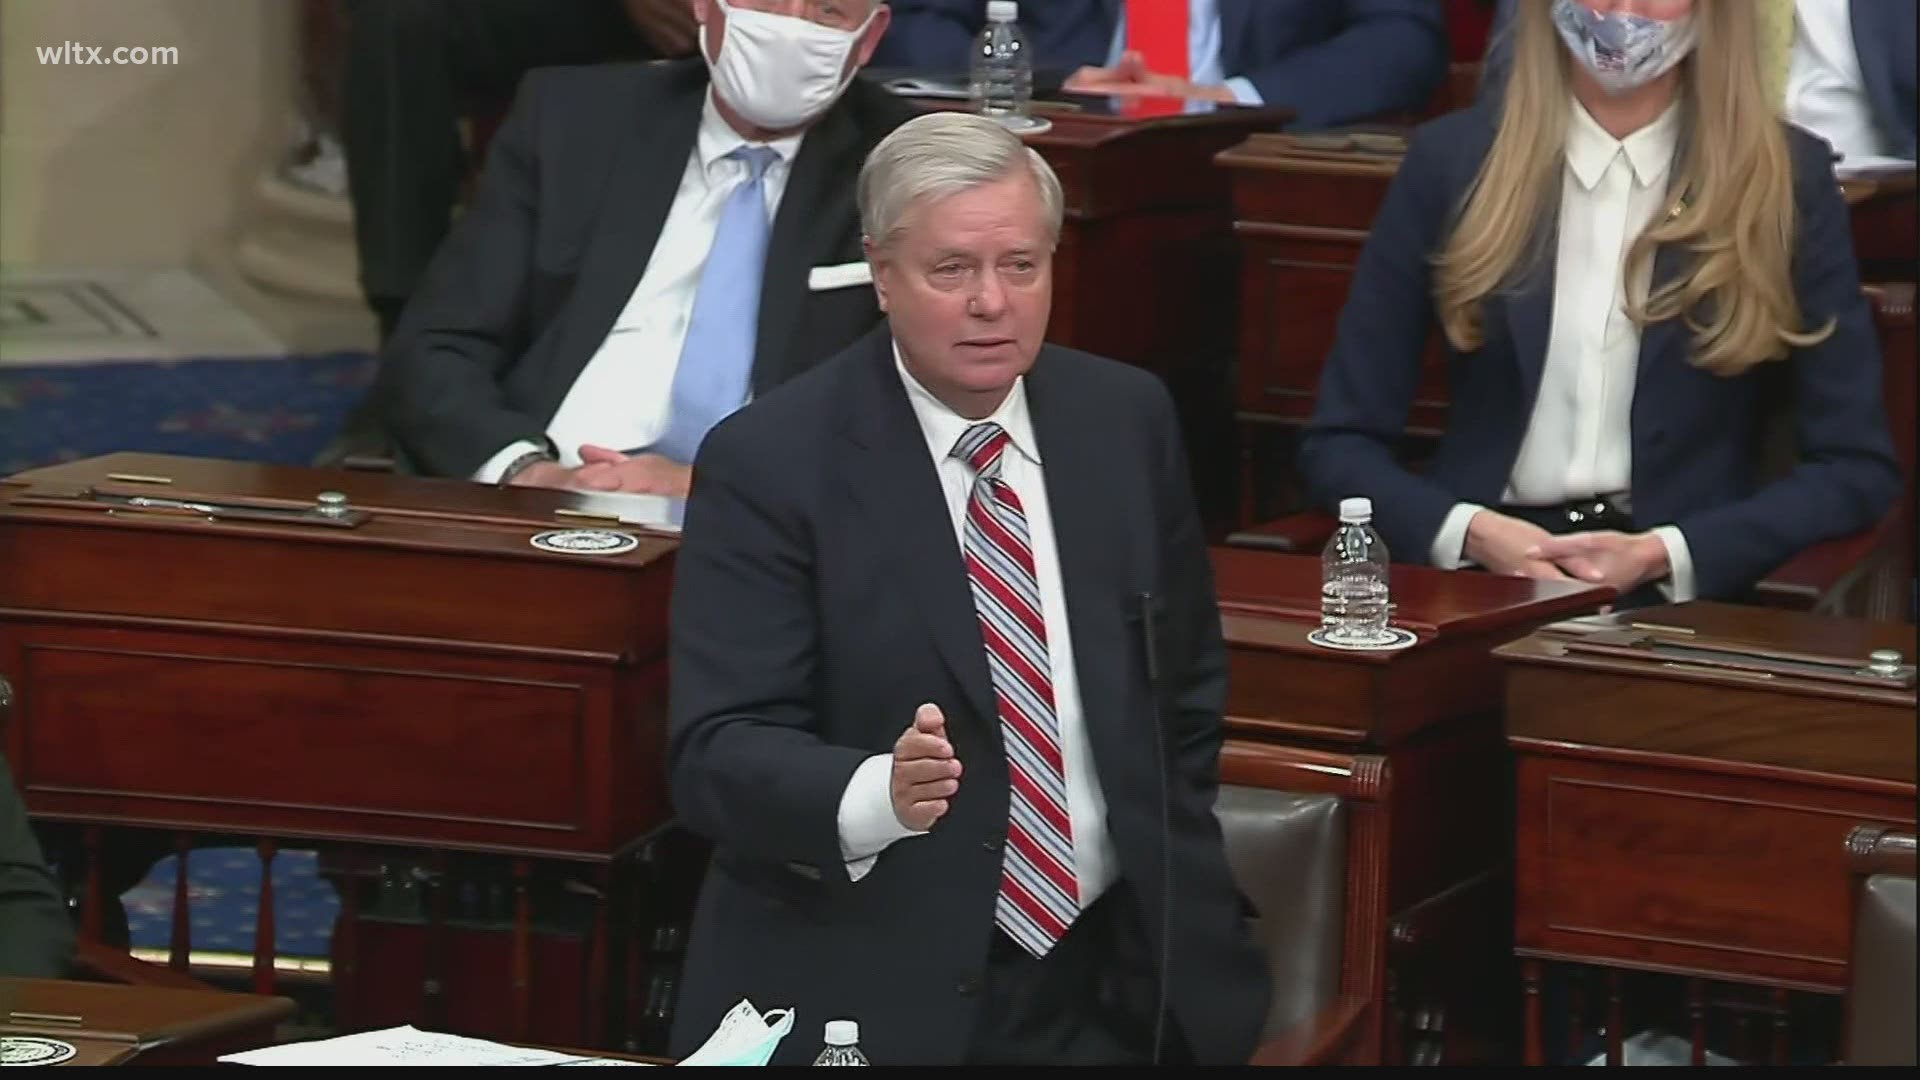 One of President Trump's most loyal supporters U.S. Senator Lindsey Graham said Joe Biden was lawfully elected and will be our next president.